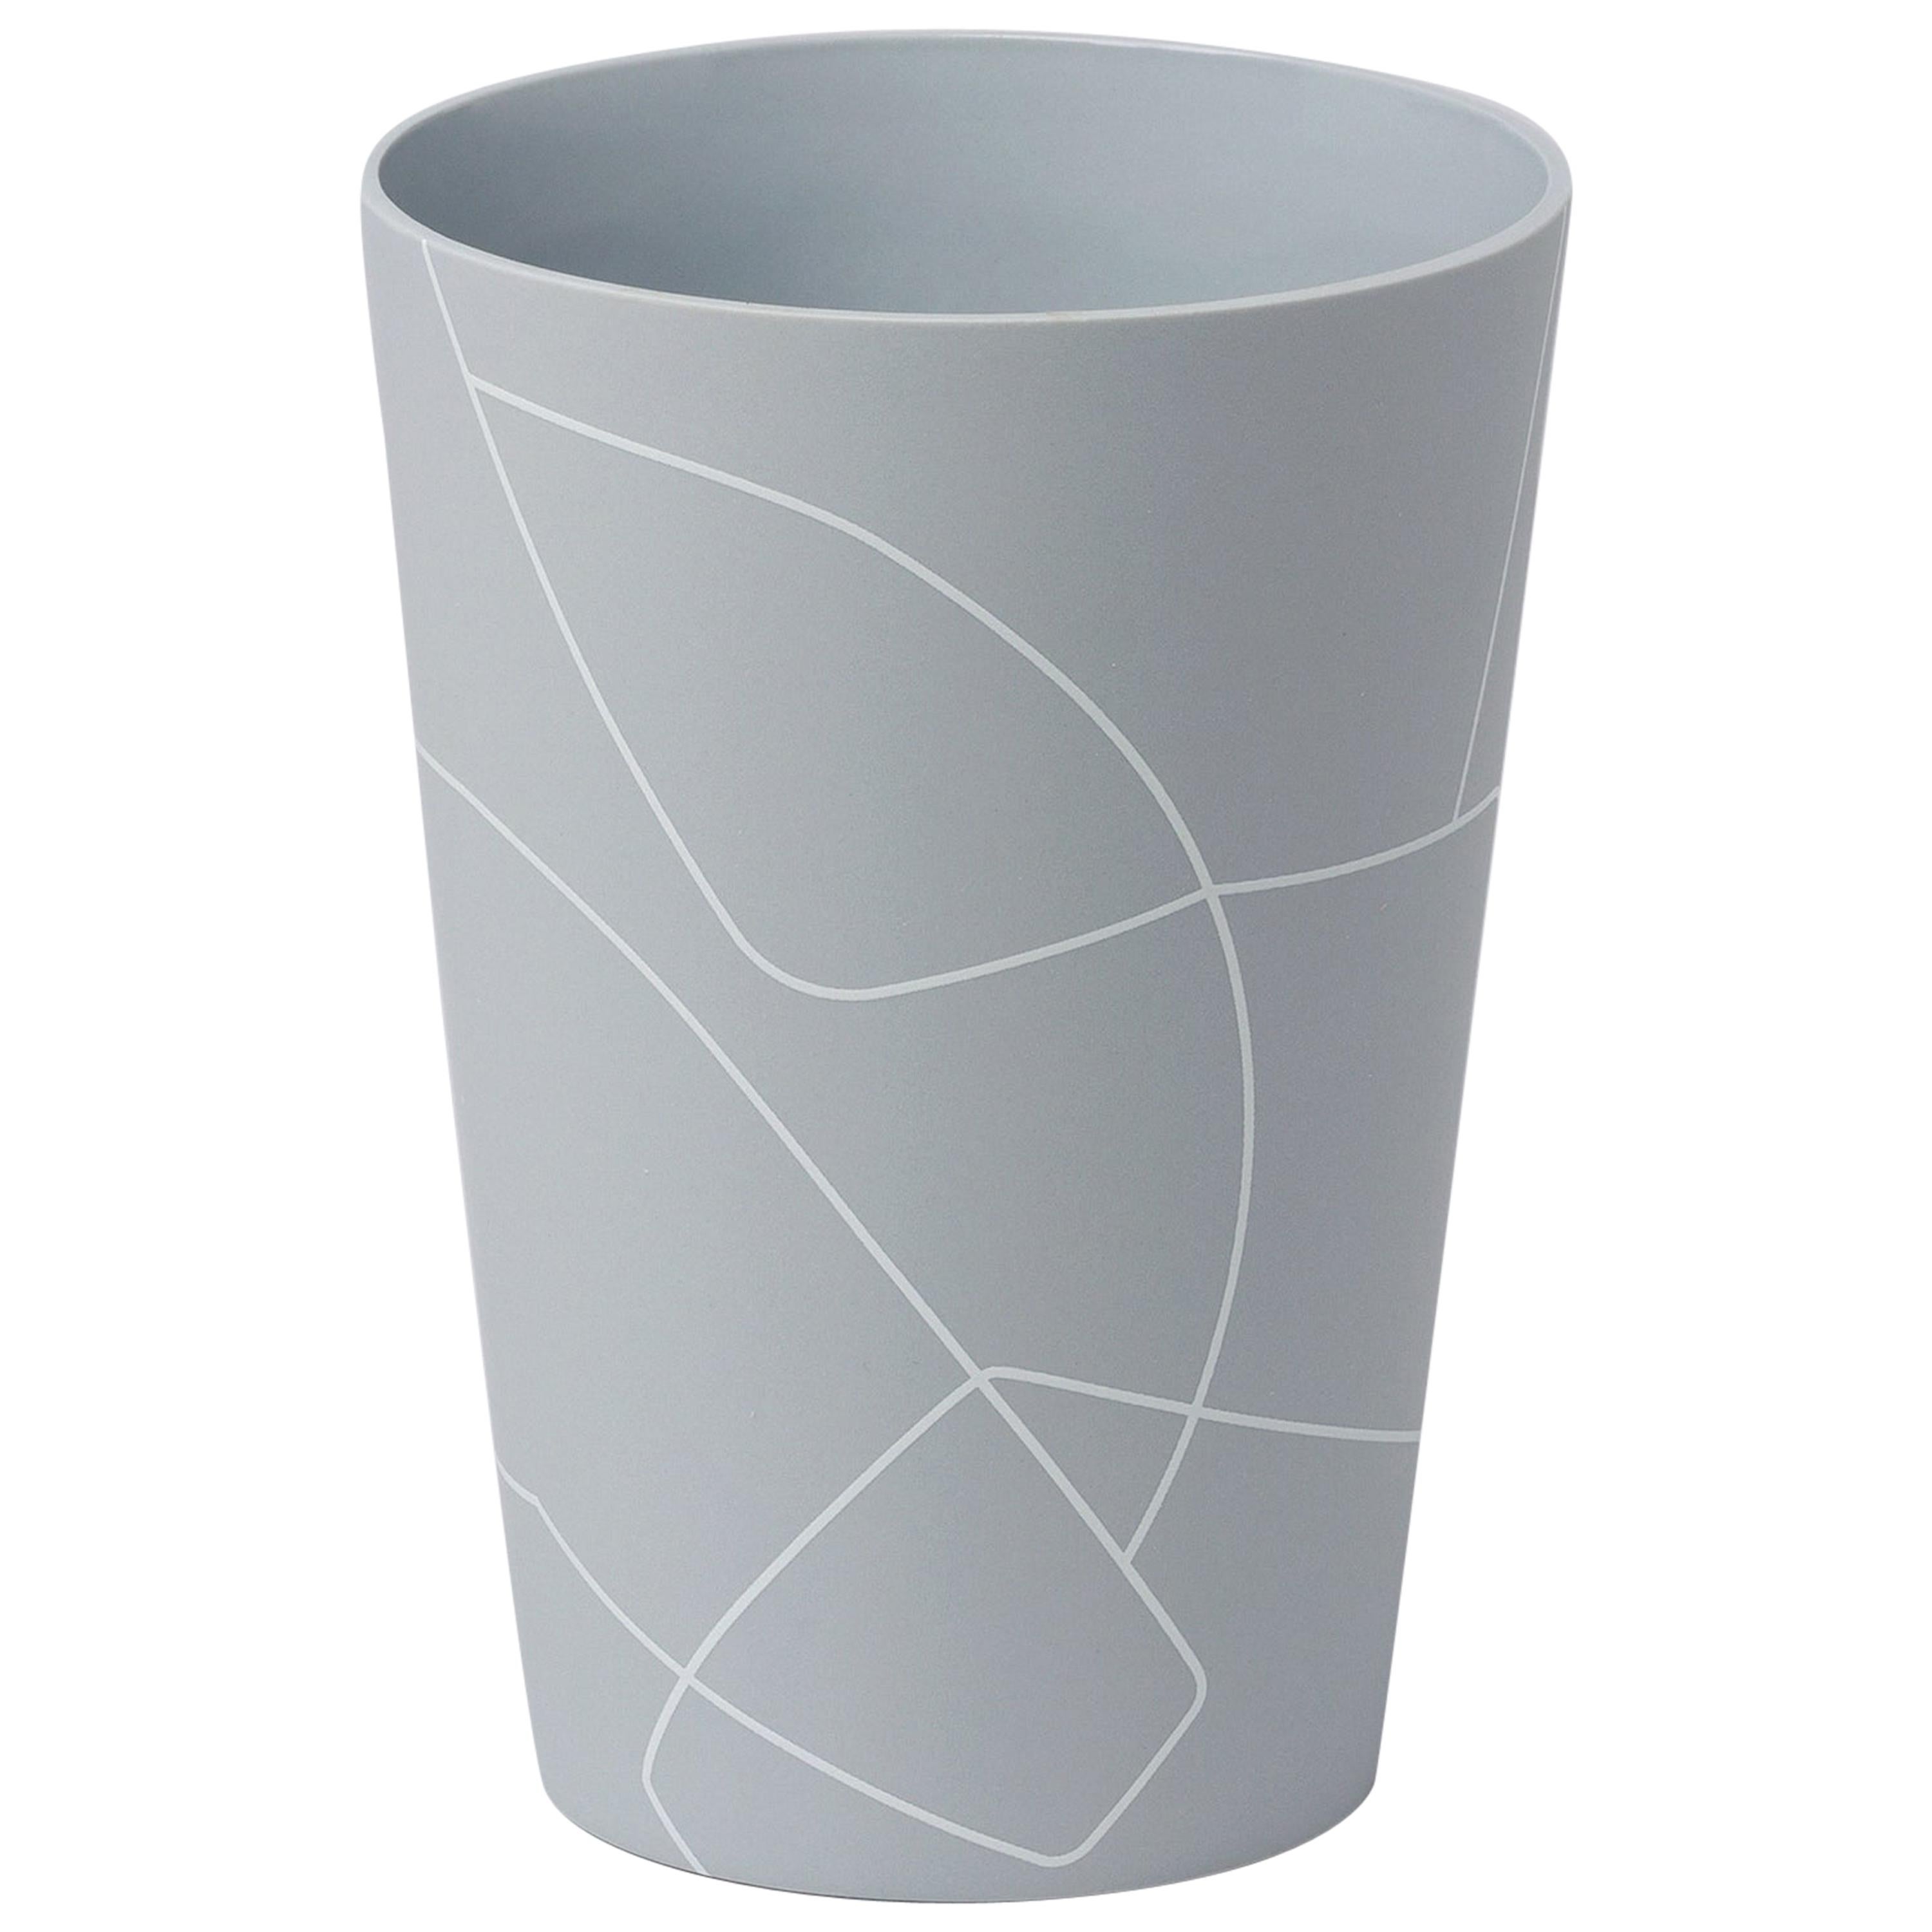 Small Matte Medium Grey Inverted Conical Ceramic Vase with Graphic Line Pattern For Sale